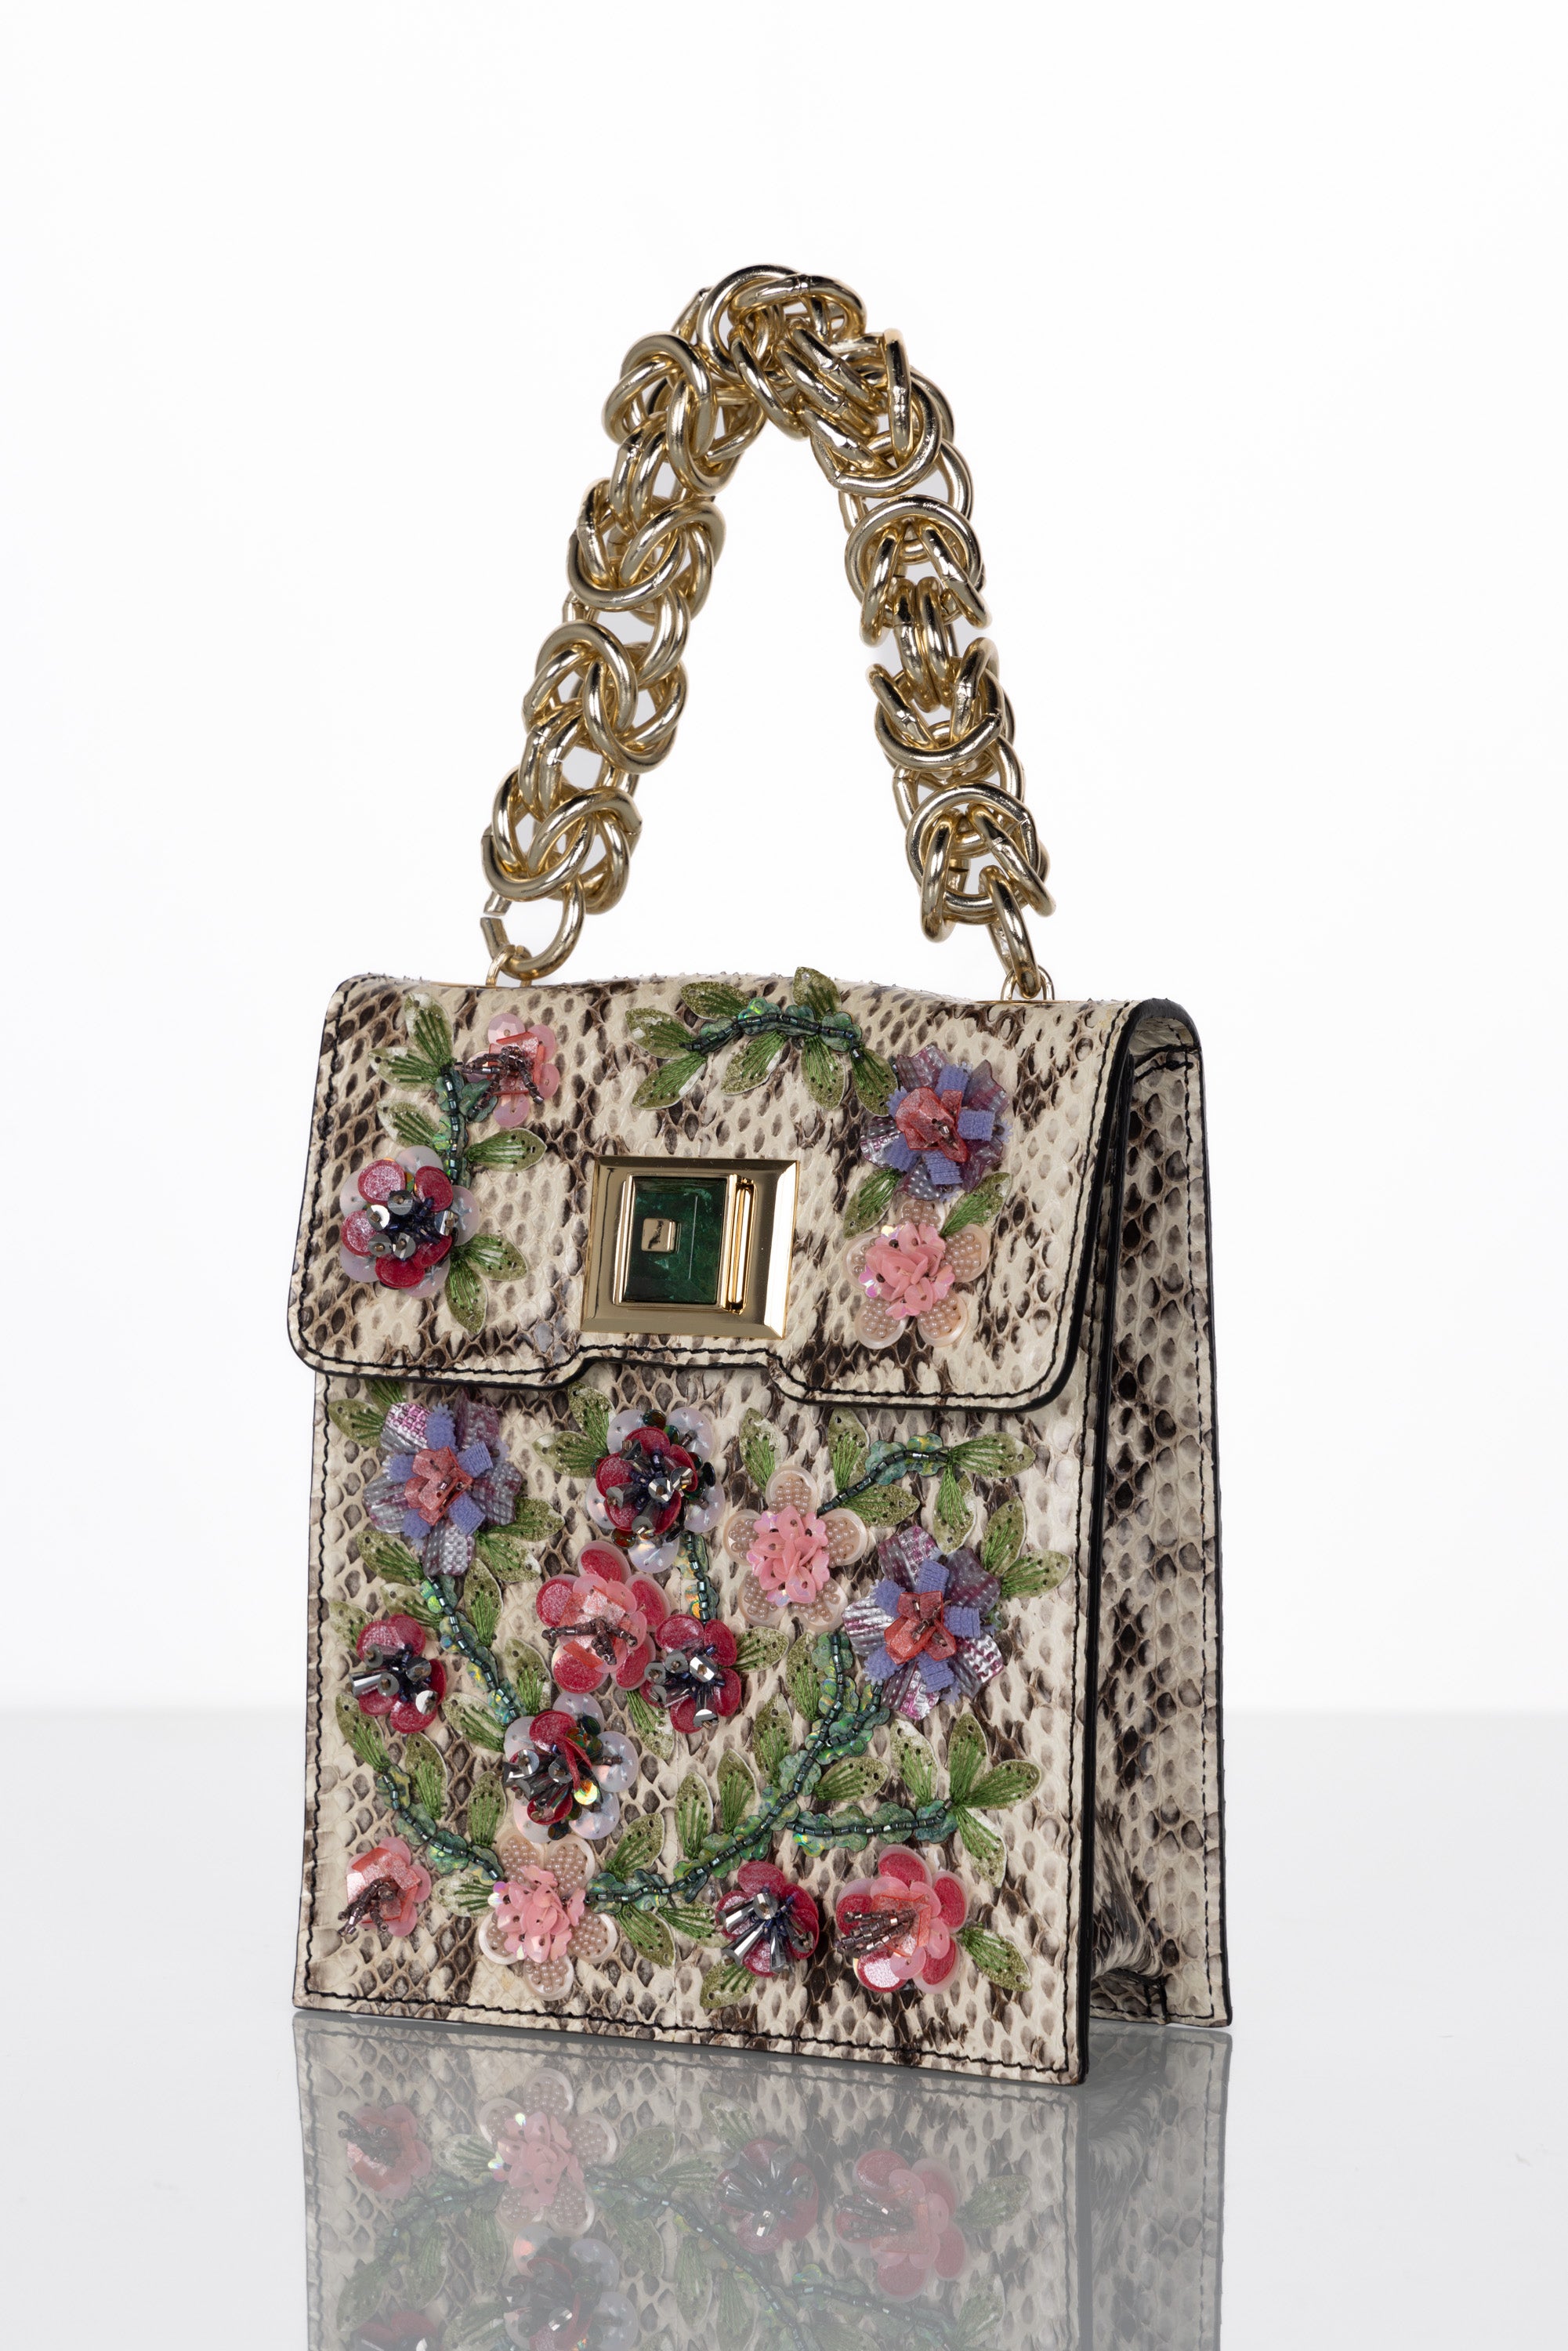 Gorgeous Andrew GN Bag done in snakeskin with beaded flower embellishments. Twist lock closure is a Chrysocolla gemstone. This bag is in excellent new condition with tags.
 
Handle drop: 4.5 inches
Height: 7 inches
Width: 6 inches
Depth: